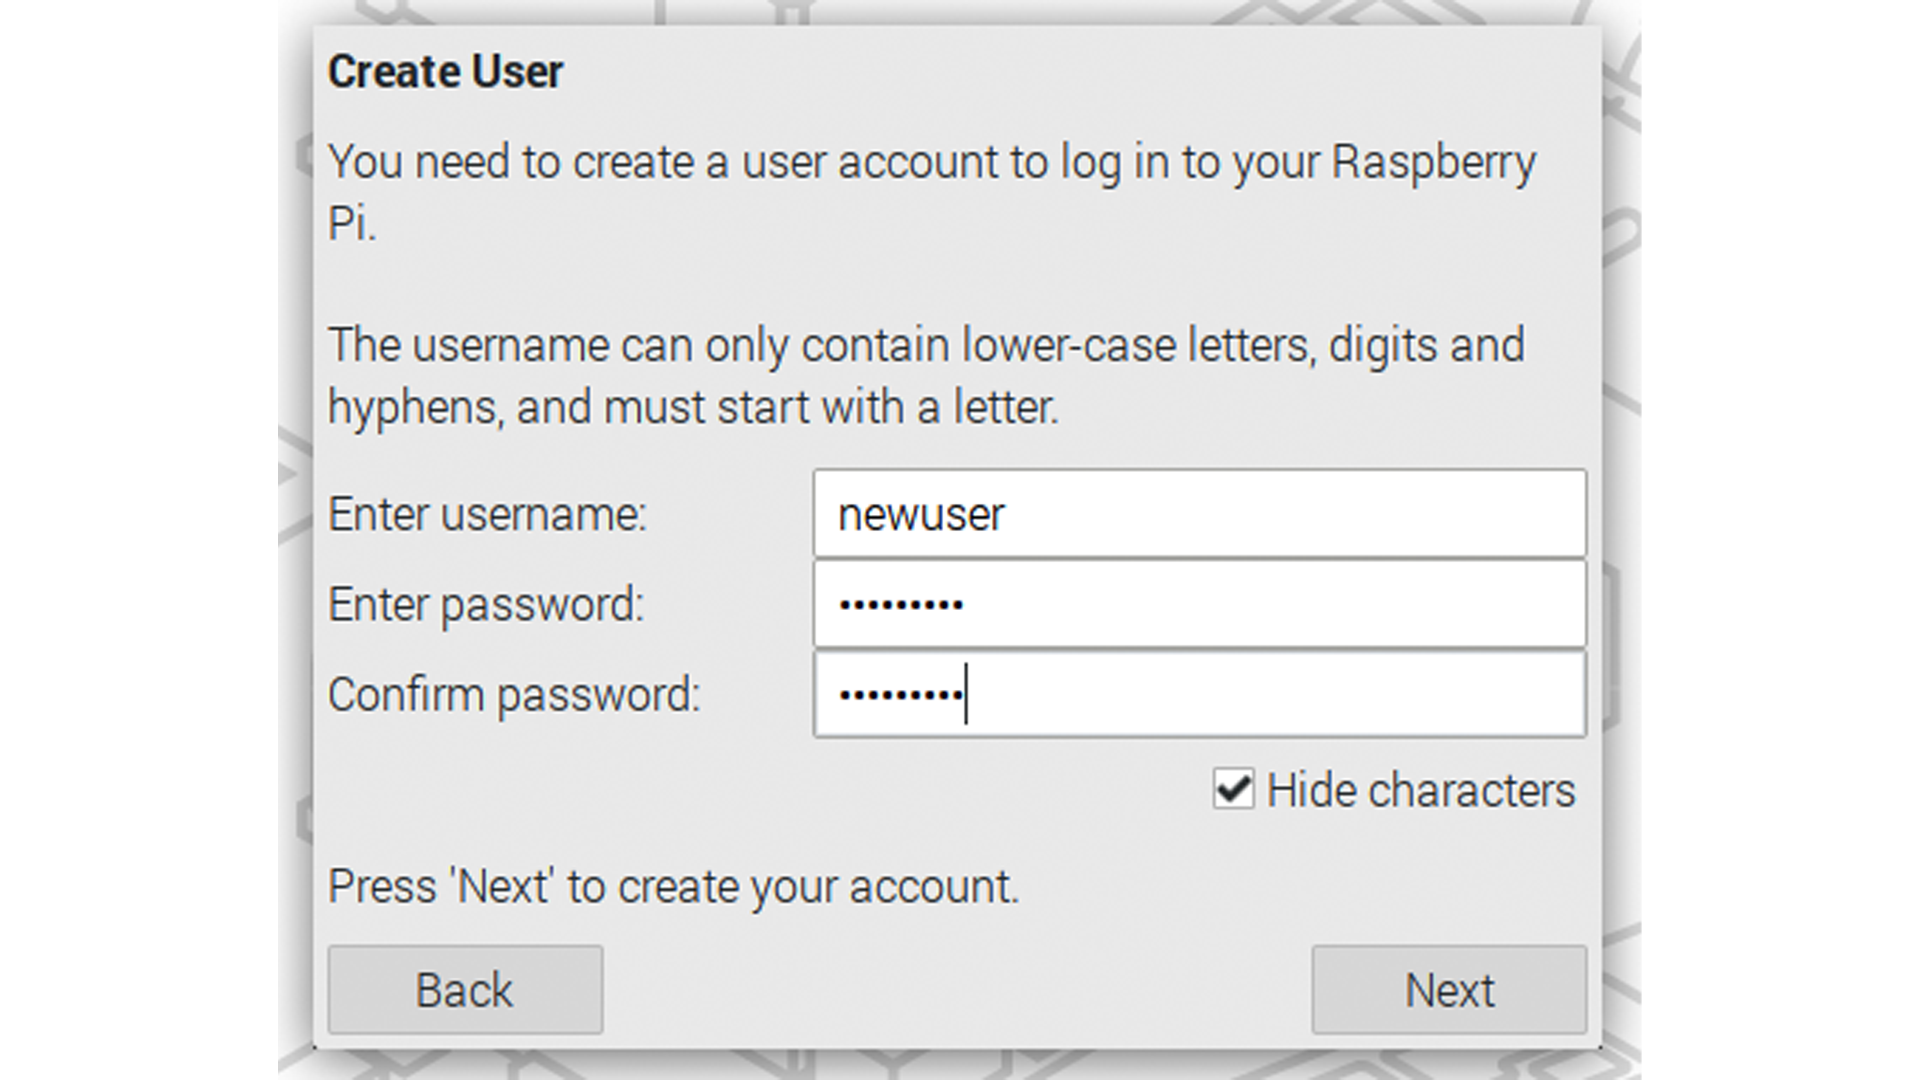 The new Raspberry Pi &quot;create user&quot; setup screen, which is now unskippable.